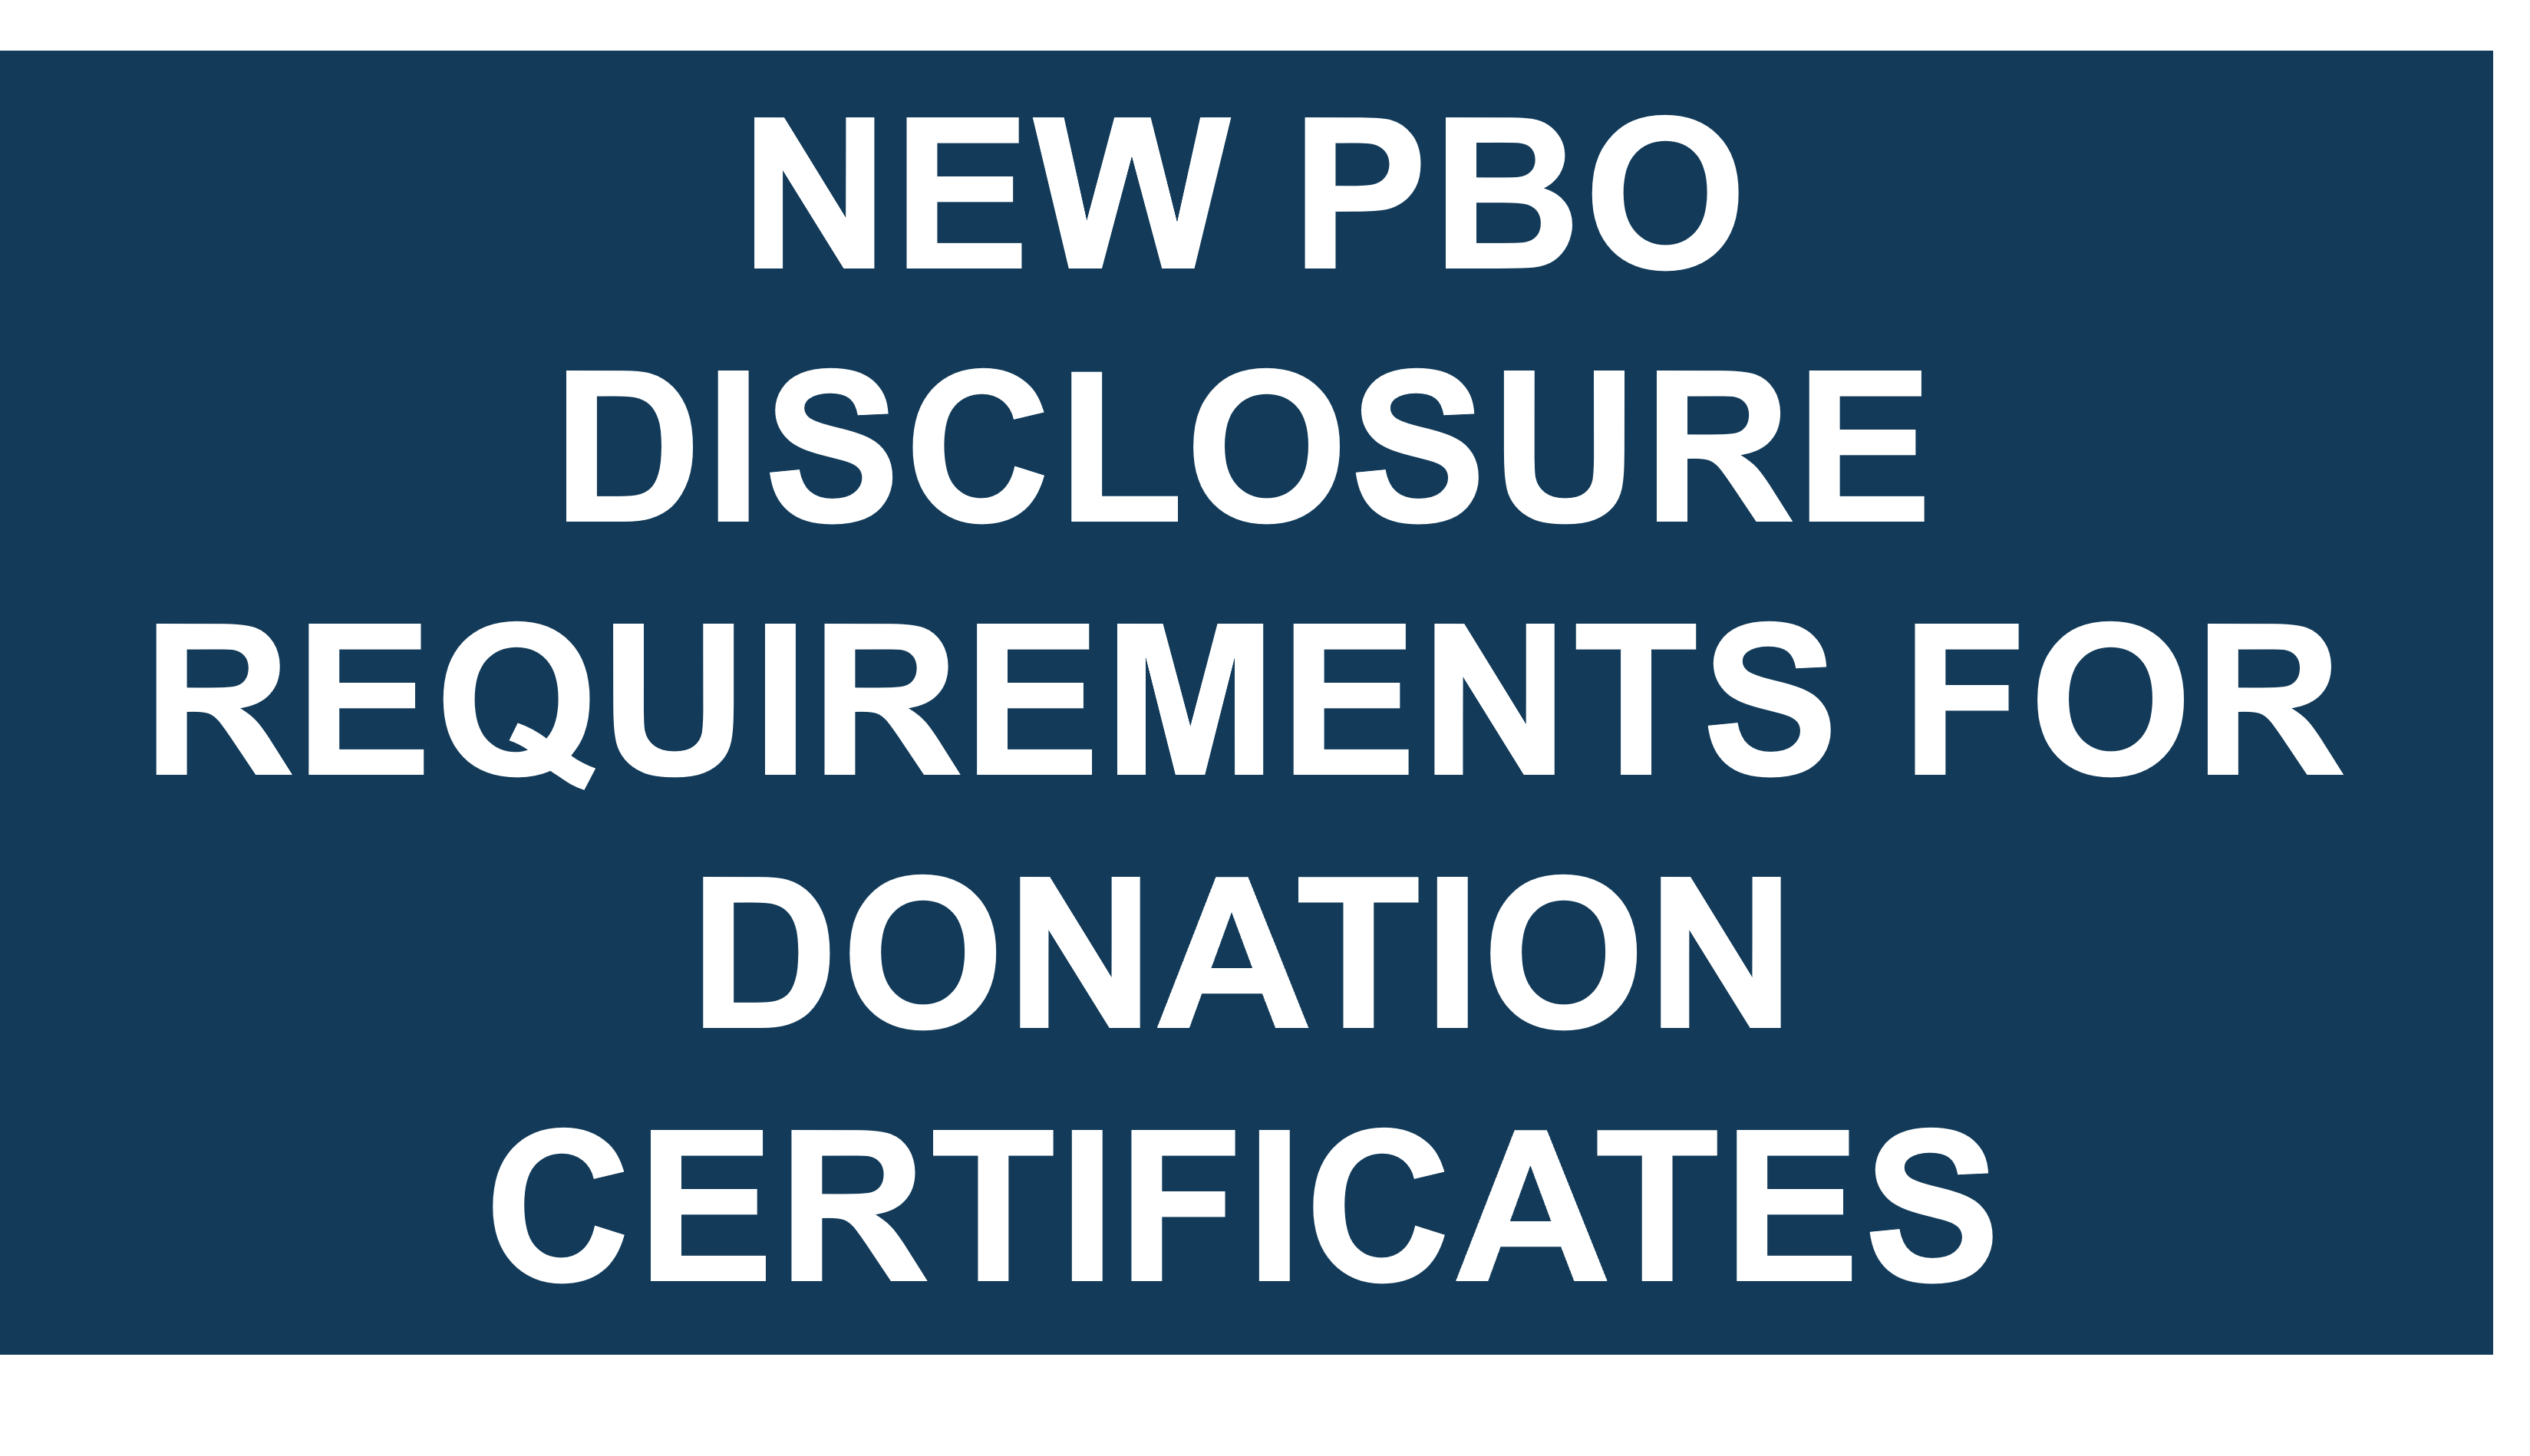 New PBO disclosure requirements for donation certificates